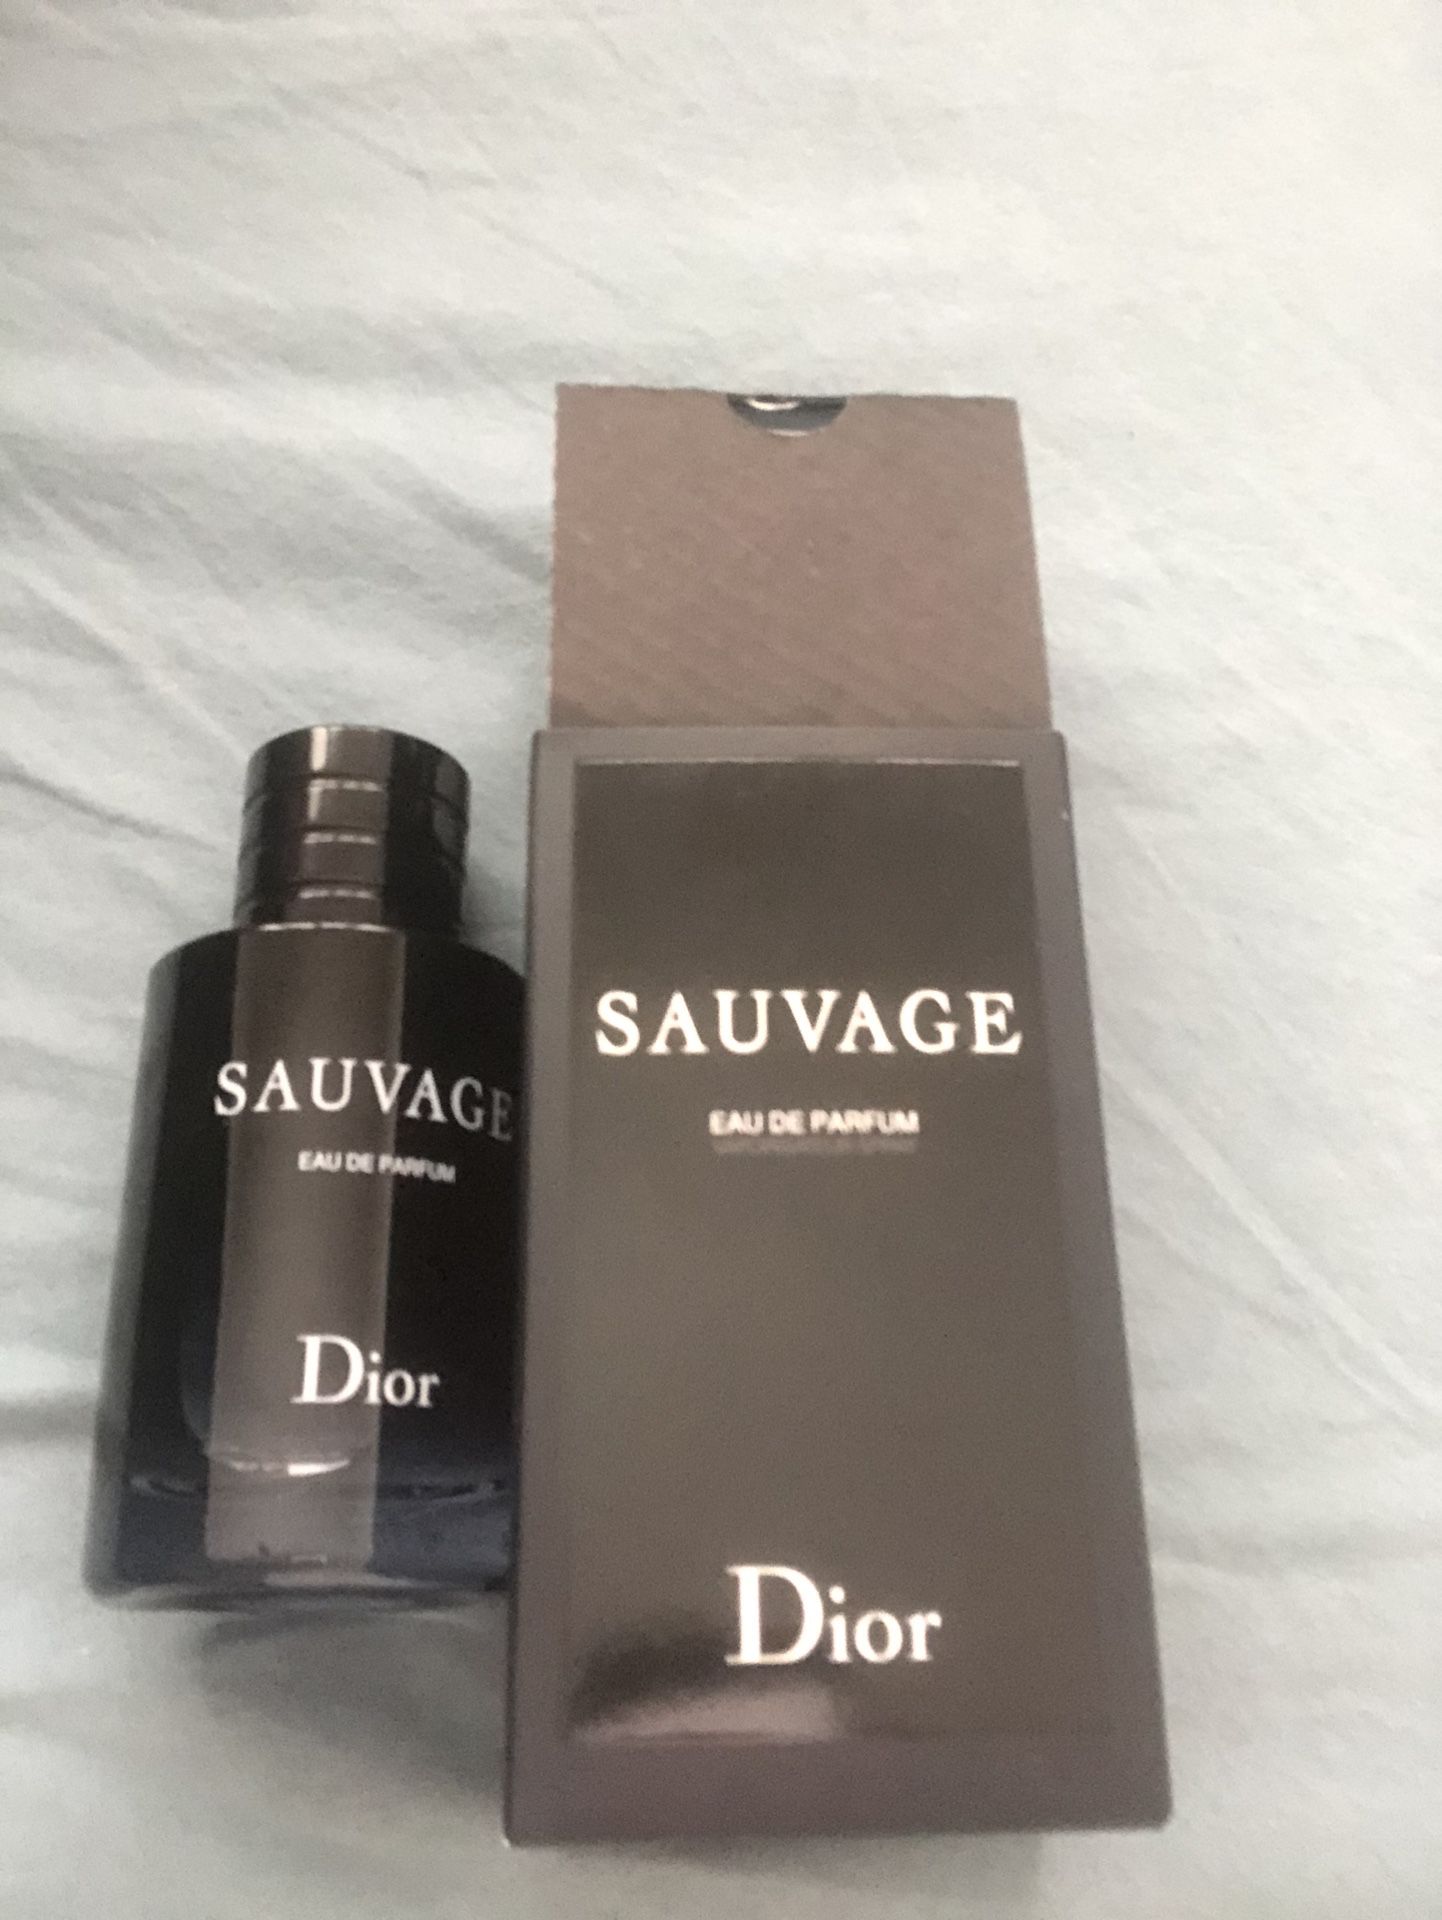 Sauvage by Dior 60 ml